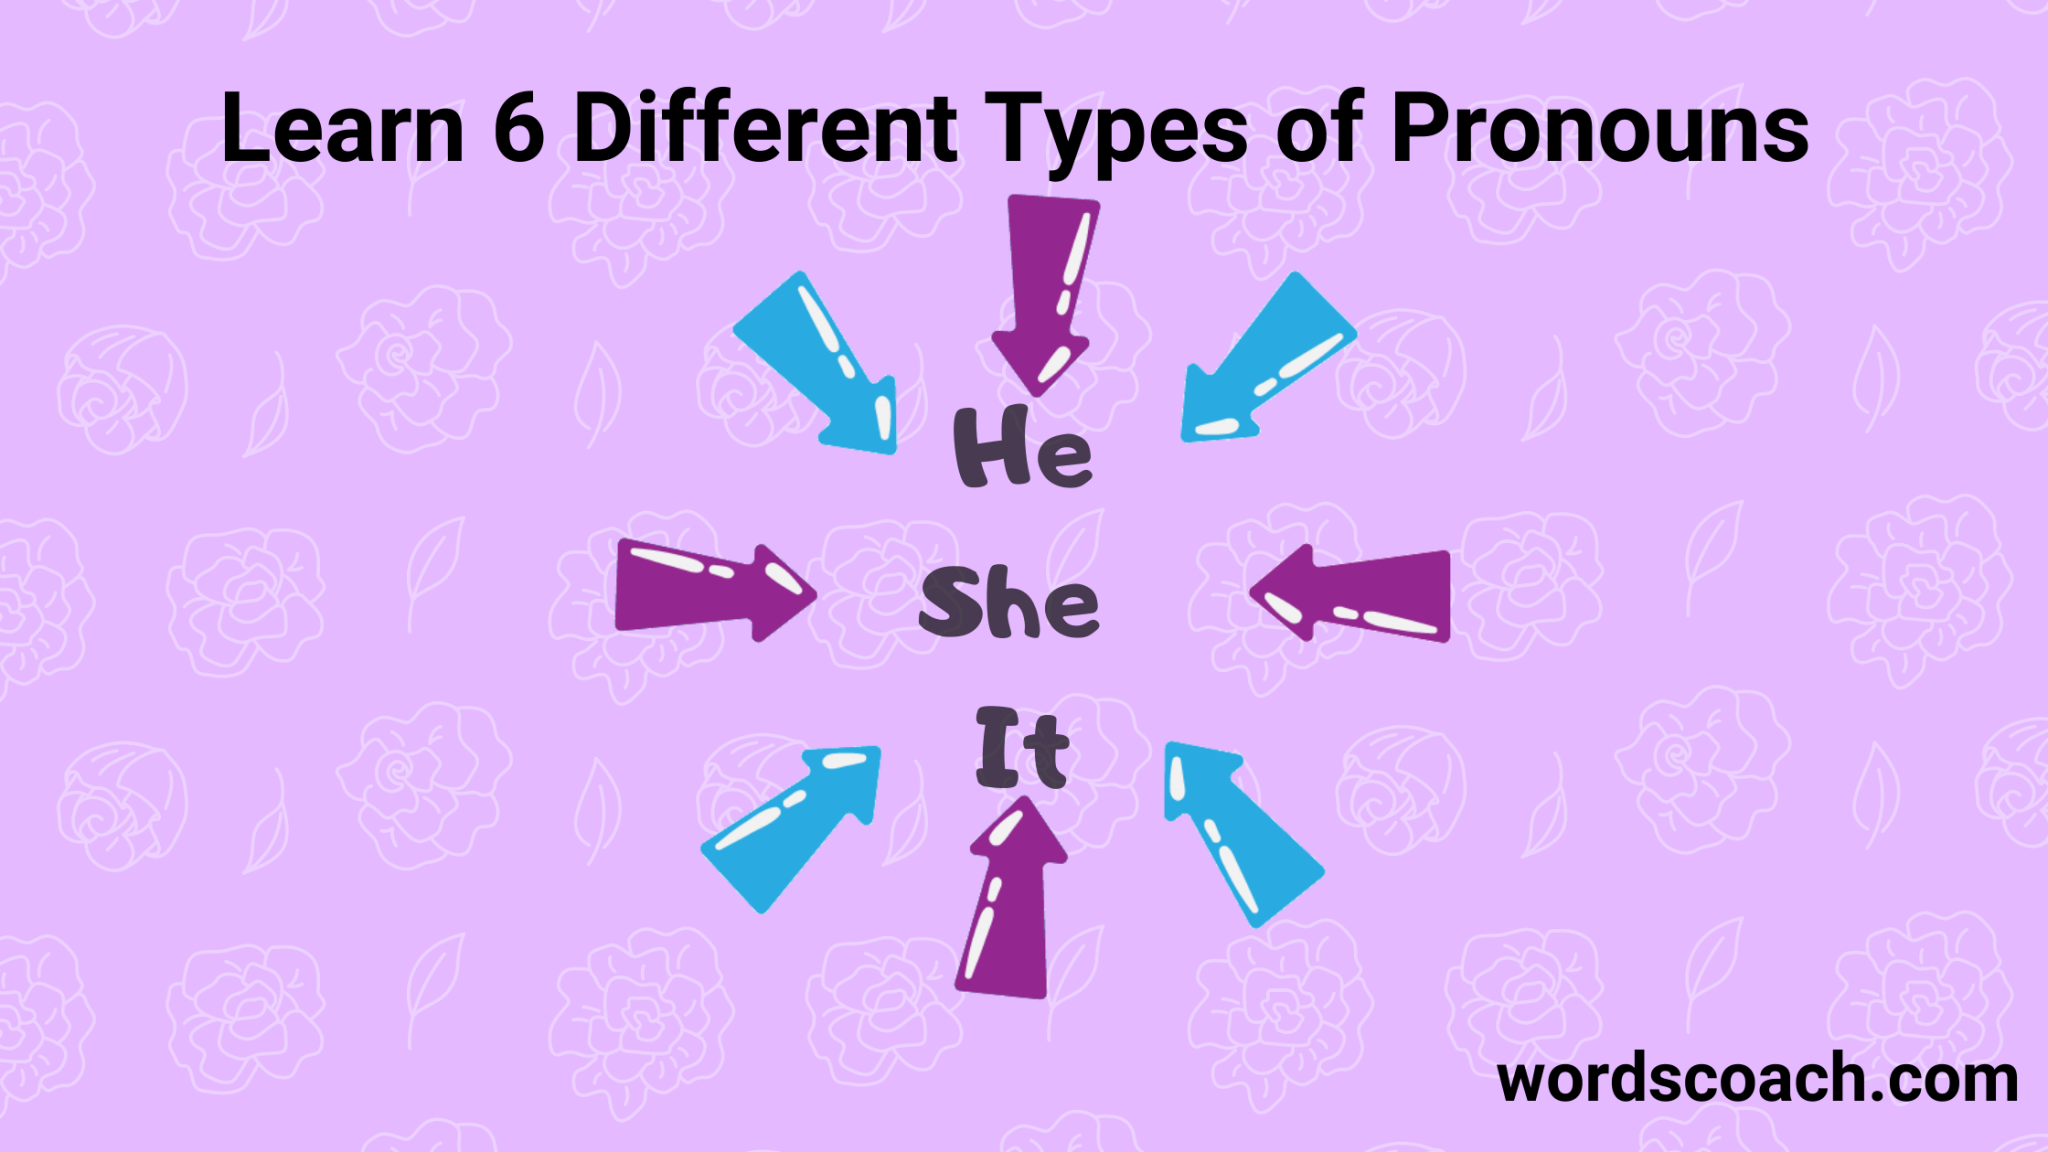 examples-of-pronouns-word-coach